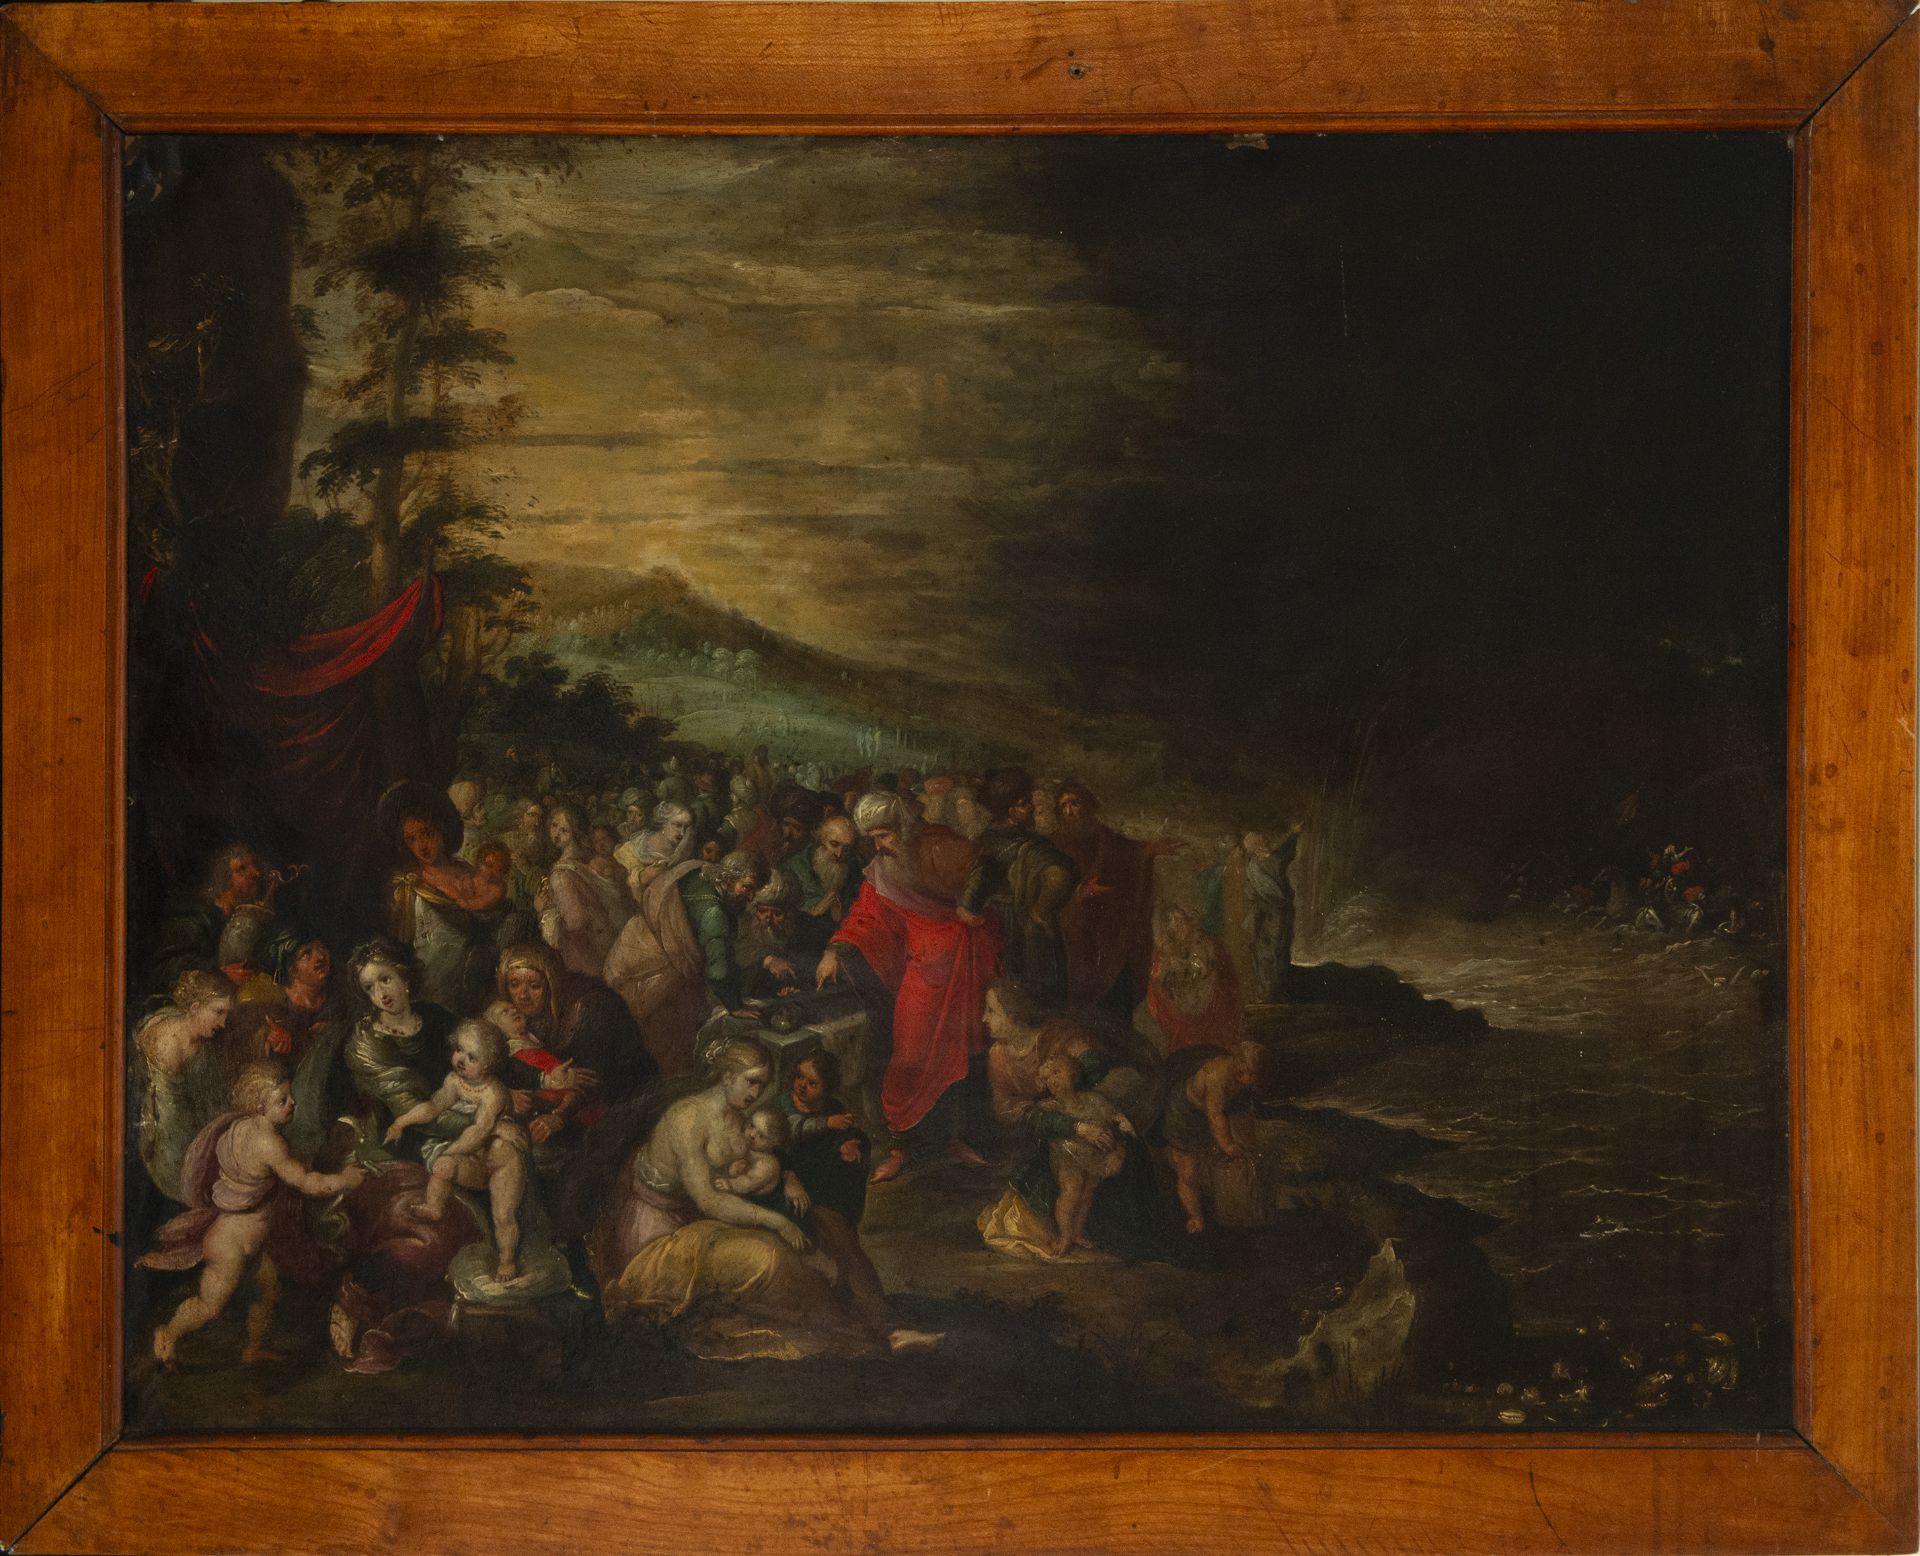 The Red Sea, Large copper painted in oil from the 17th century, attributable to the workshop or Fran